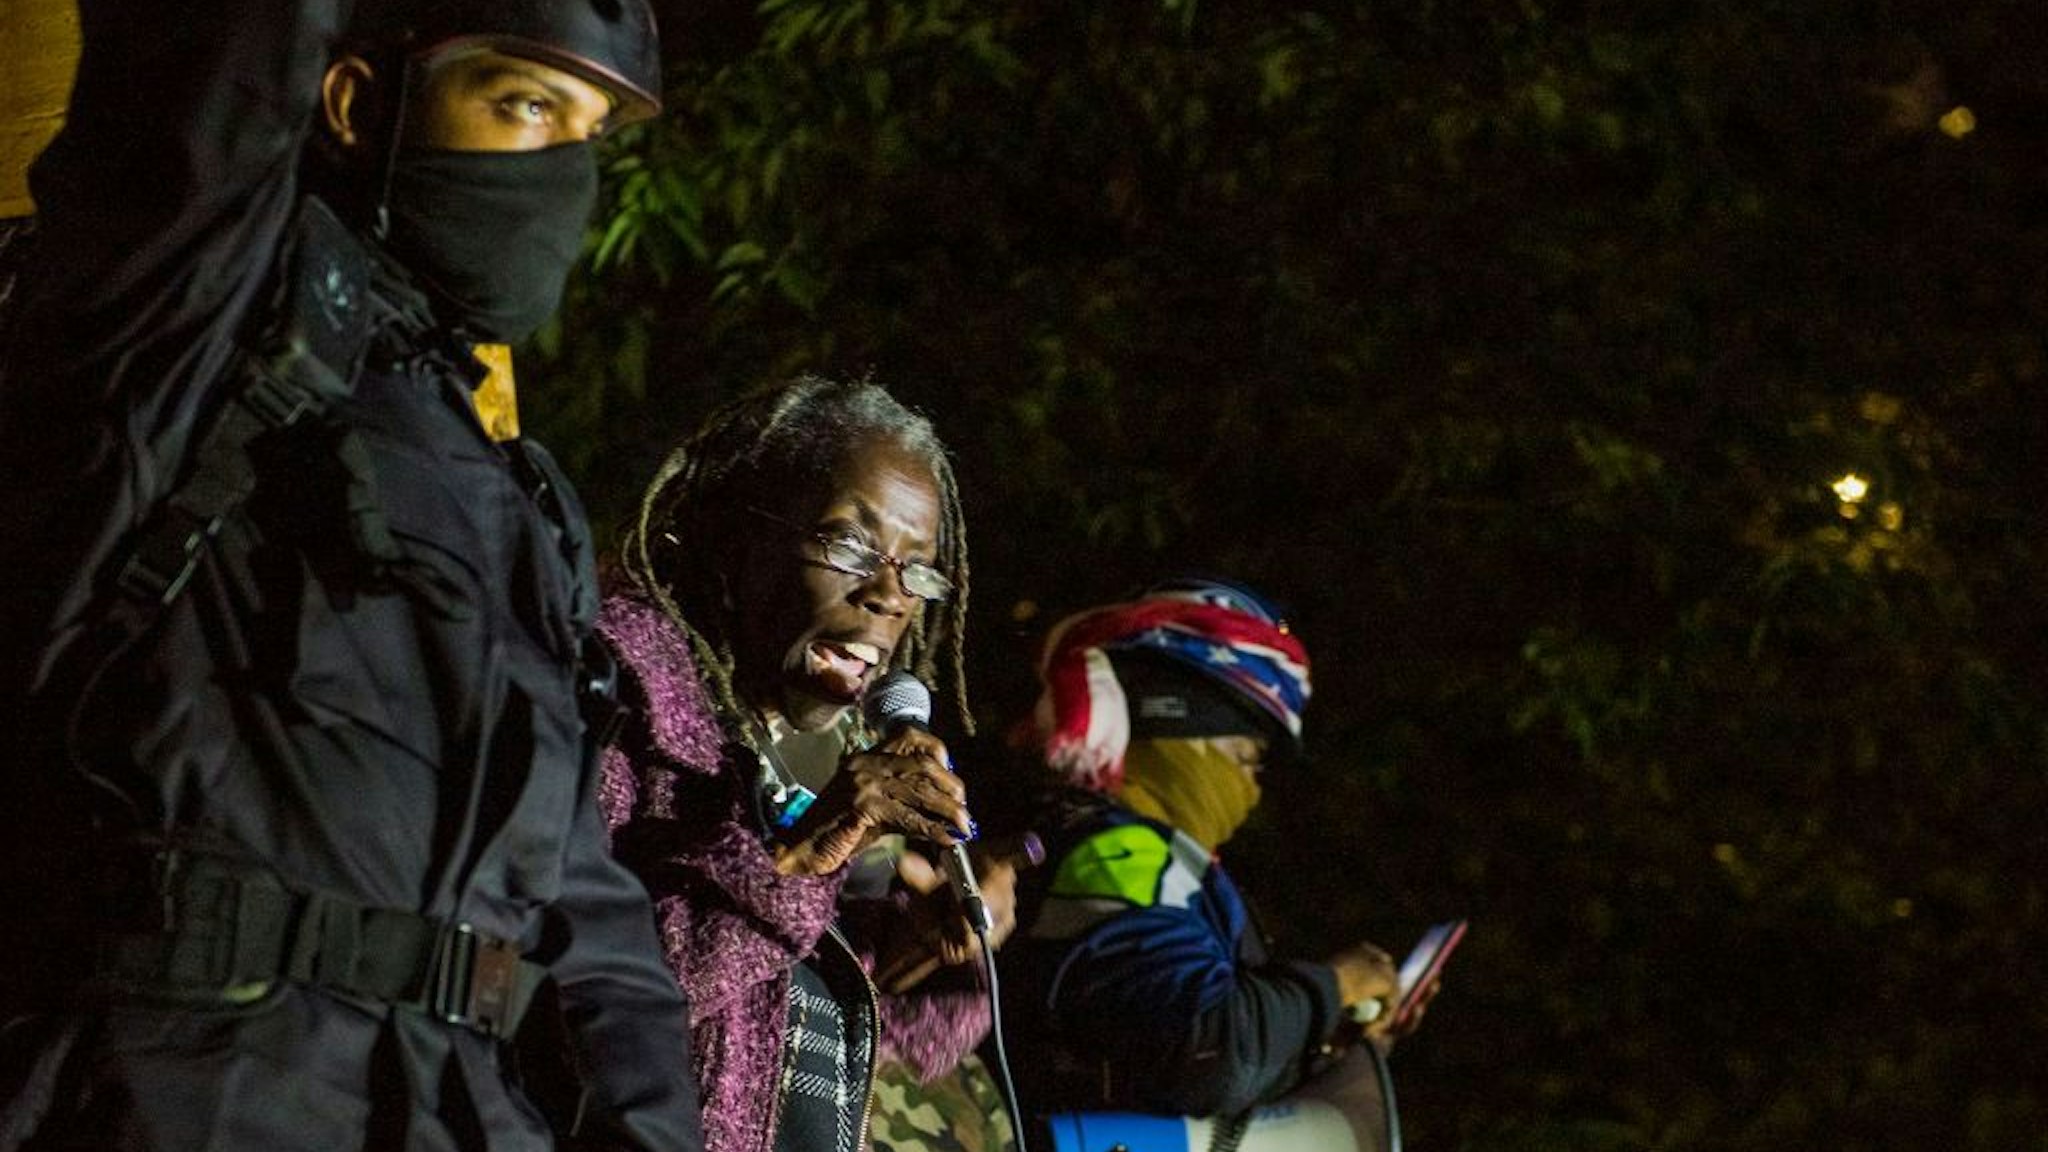 Portland City Commissioner Jo Ann Hardesty (C) addresses protesters as they take part in a rally against police brutality in Portland, Oregon late July 24, 2020